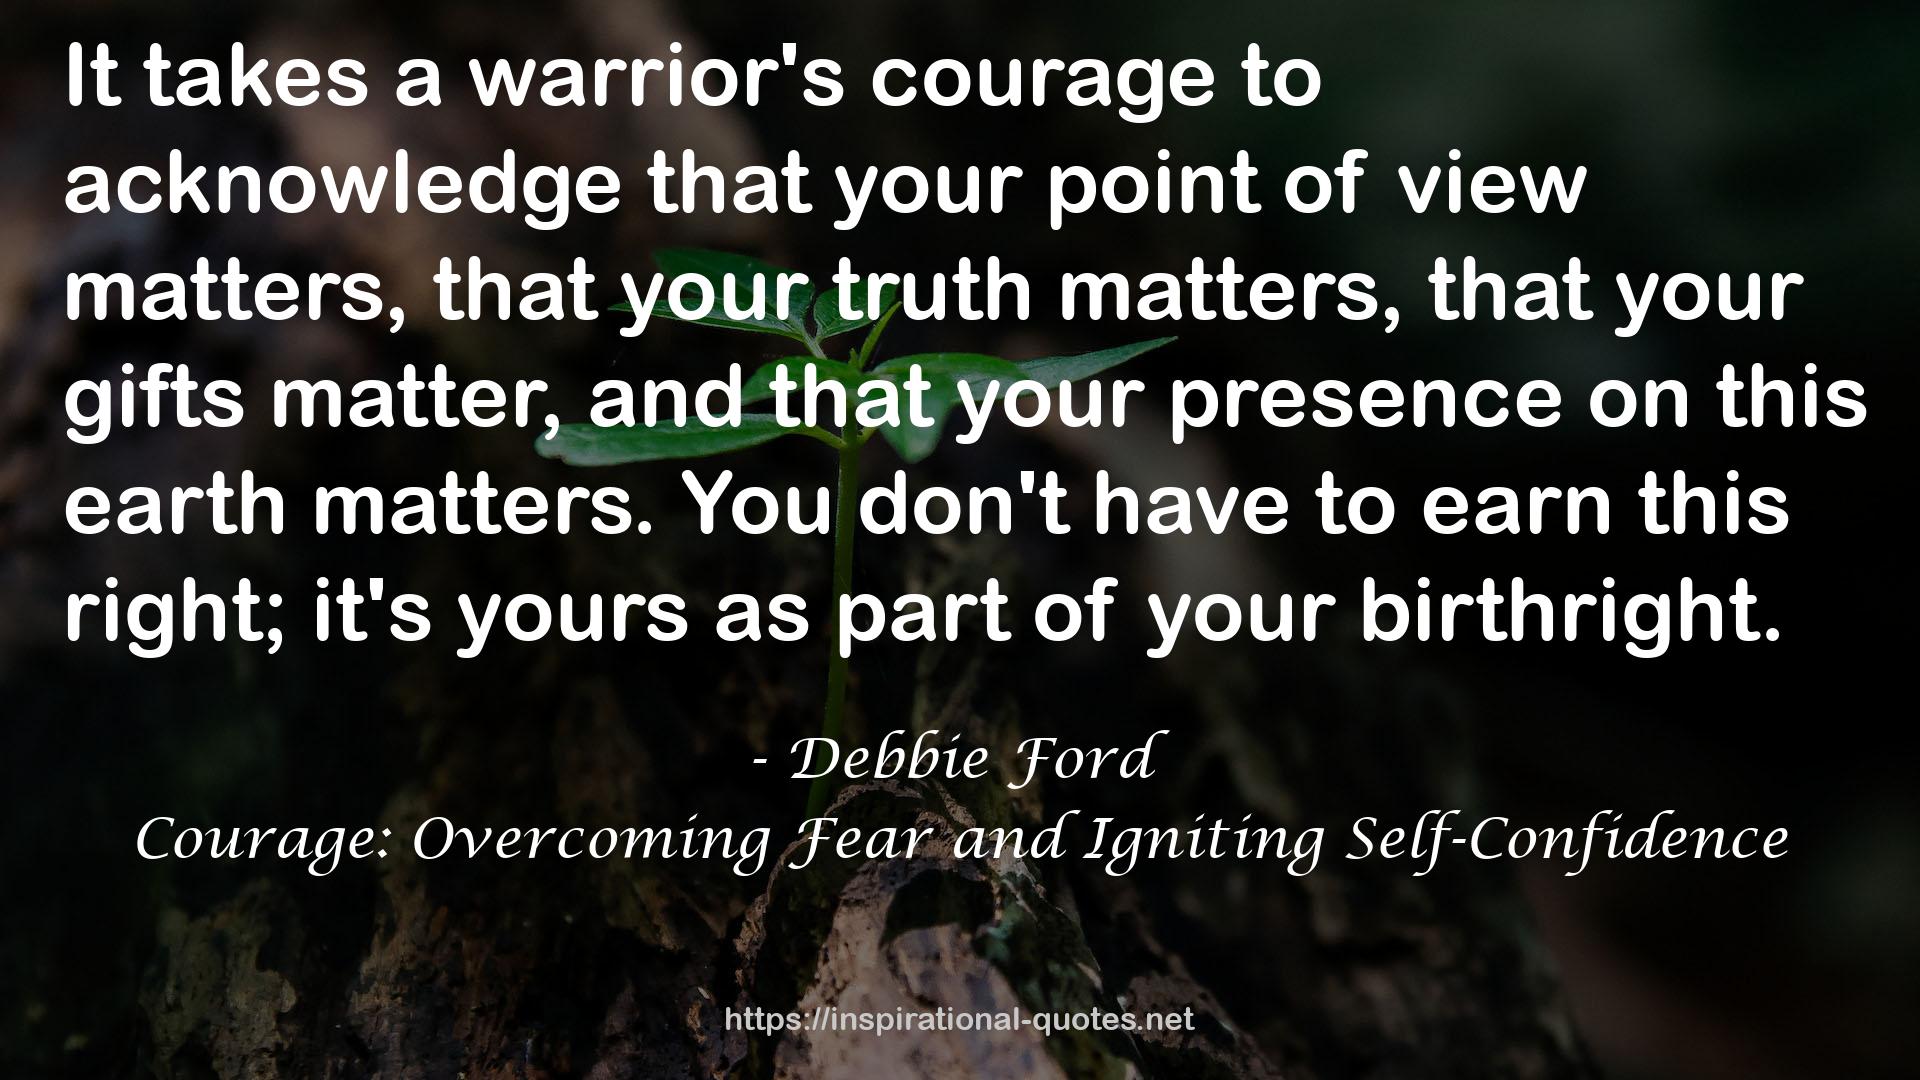 Courage: Overcoming Fear and Igniting Self-Confidence QUOTES